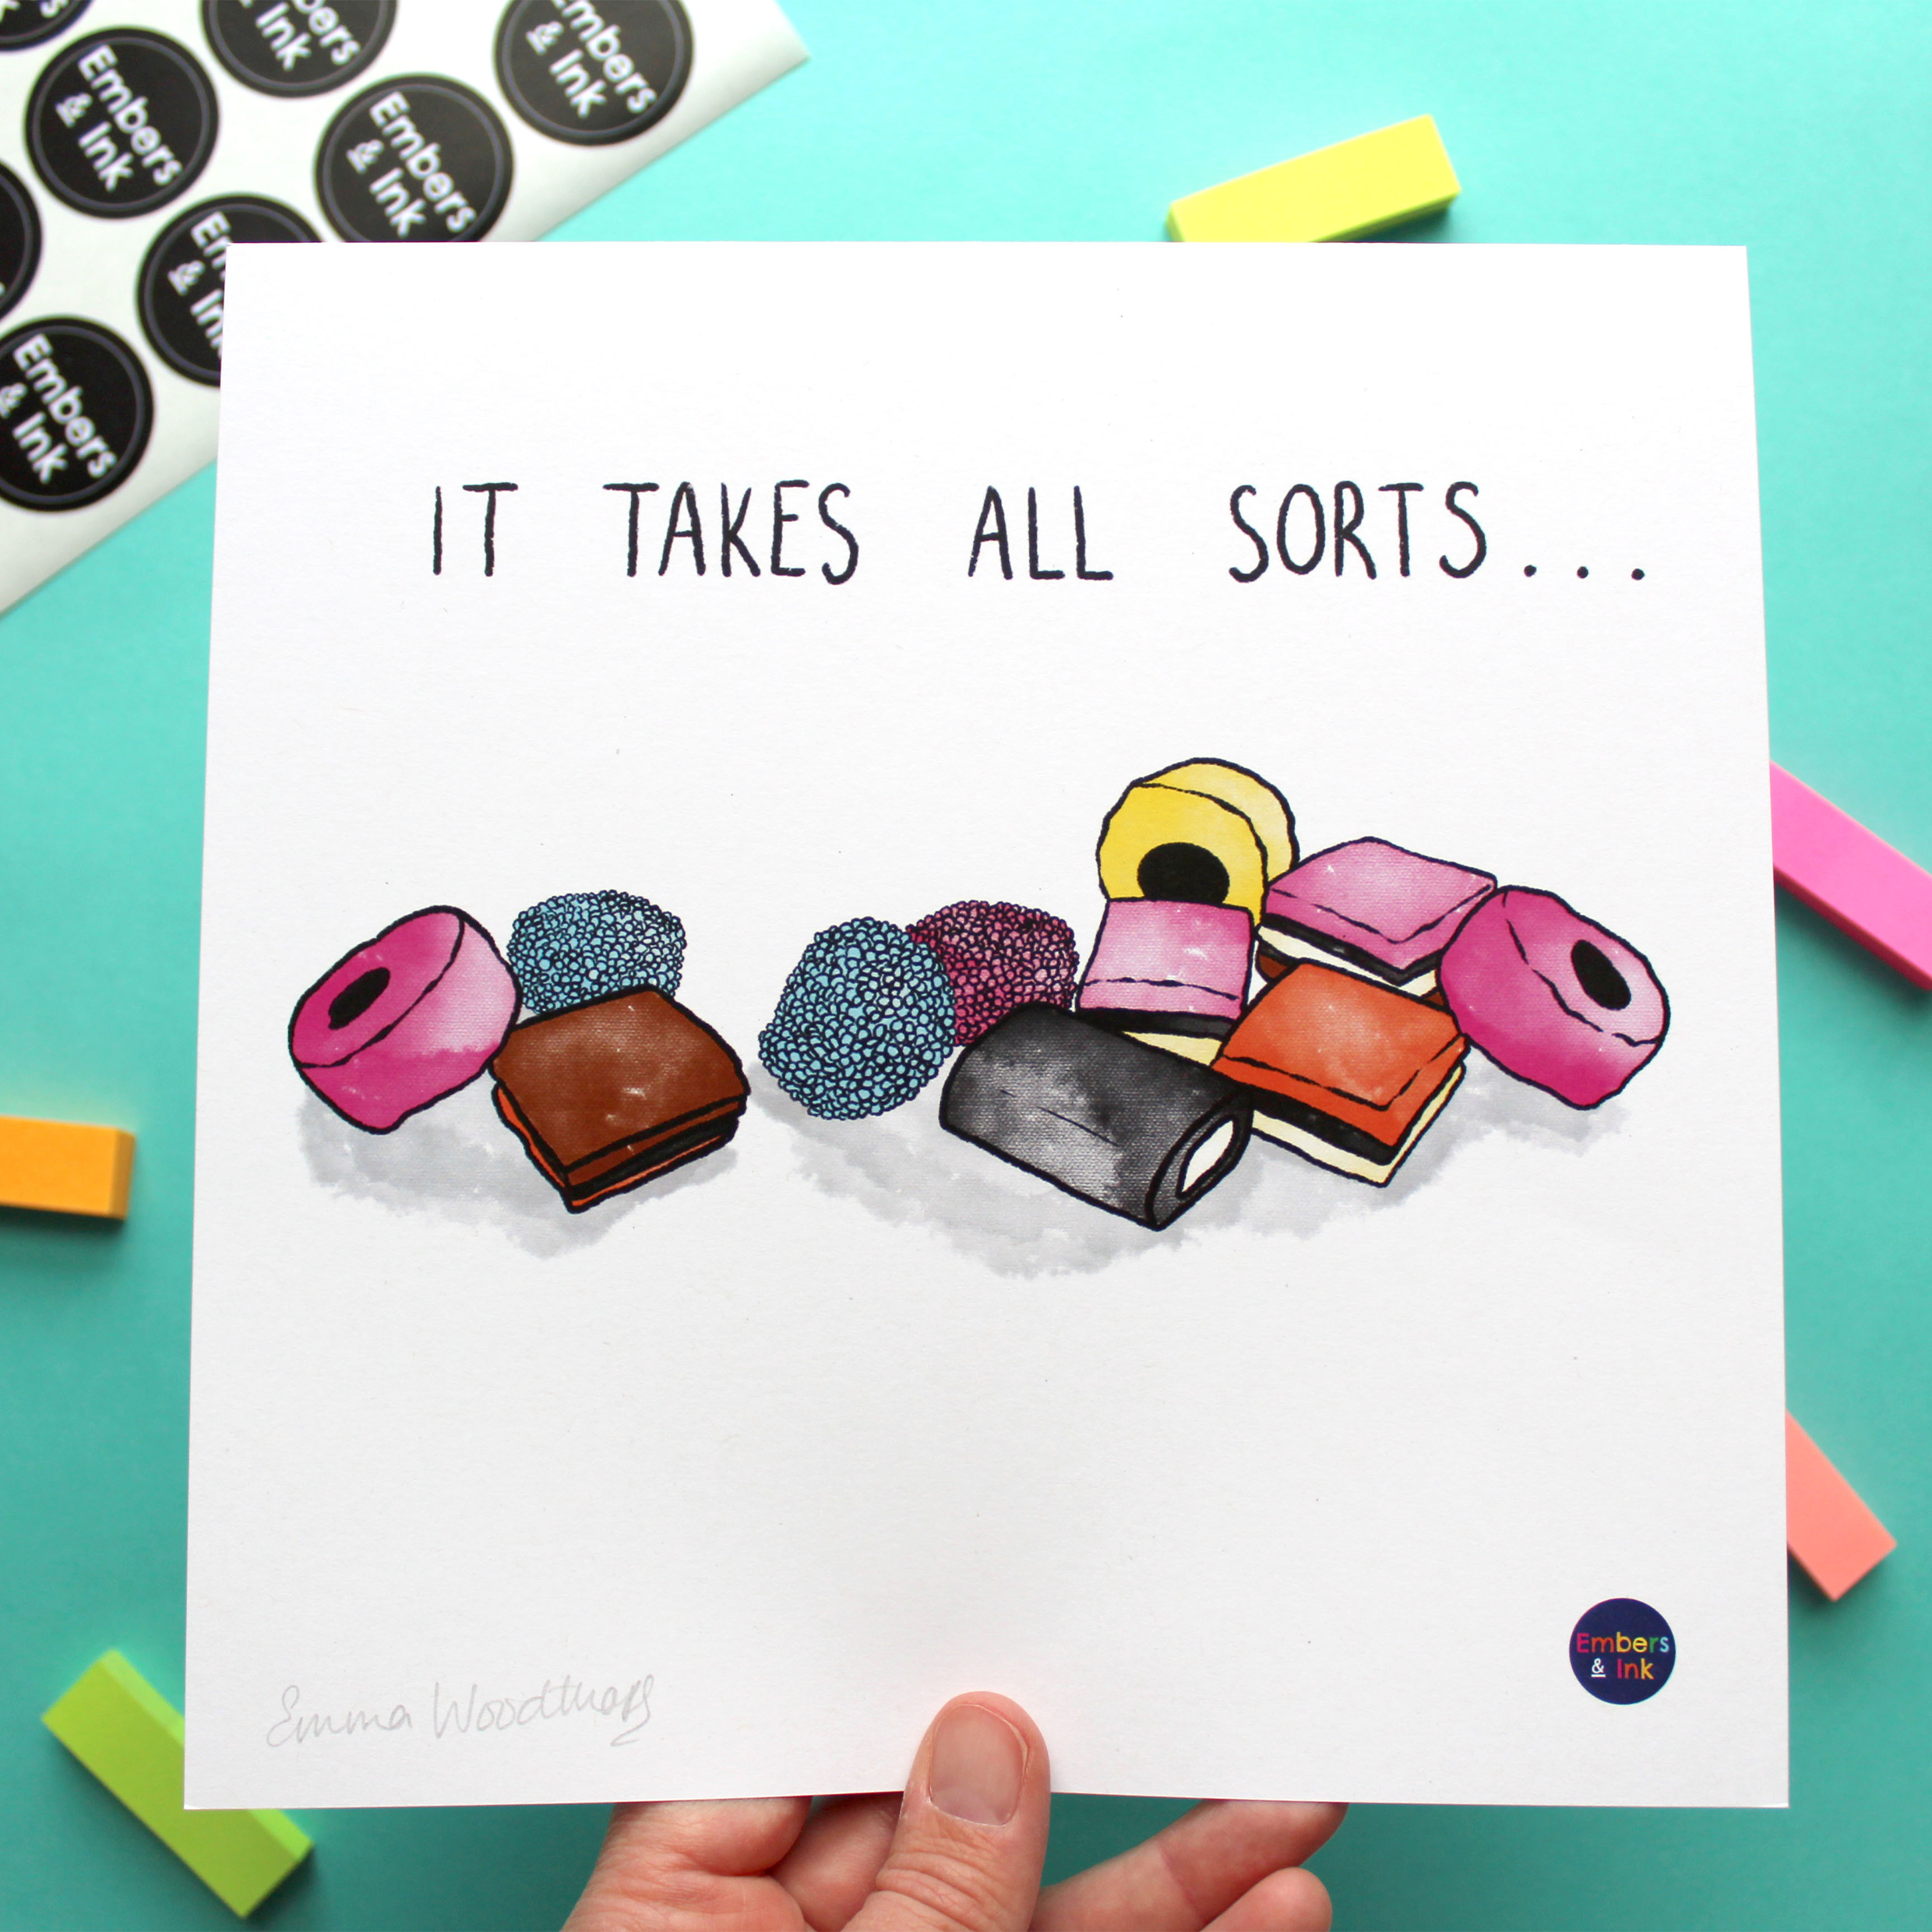 A square art print with an illustration of a pile of All Sorts sweets is shown. On the print, above the illustration, are the words 'it takes all sorts'